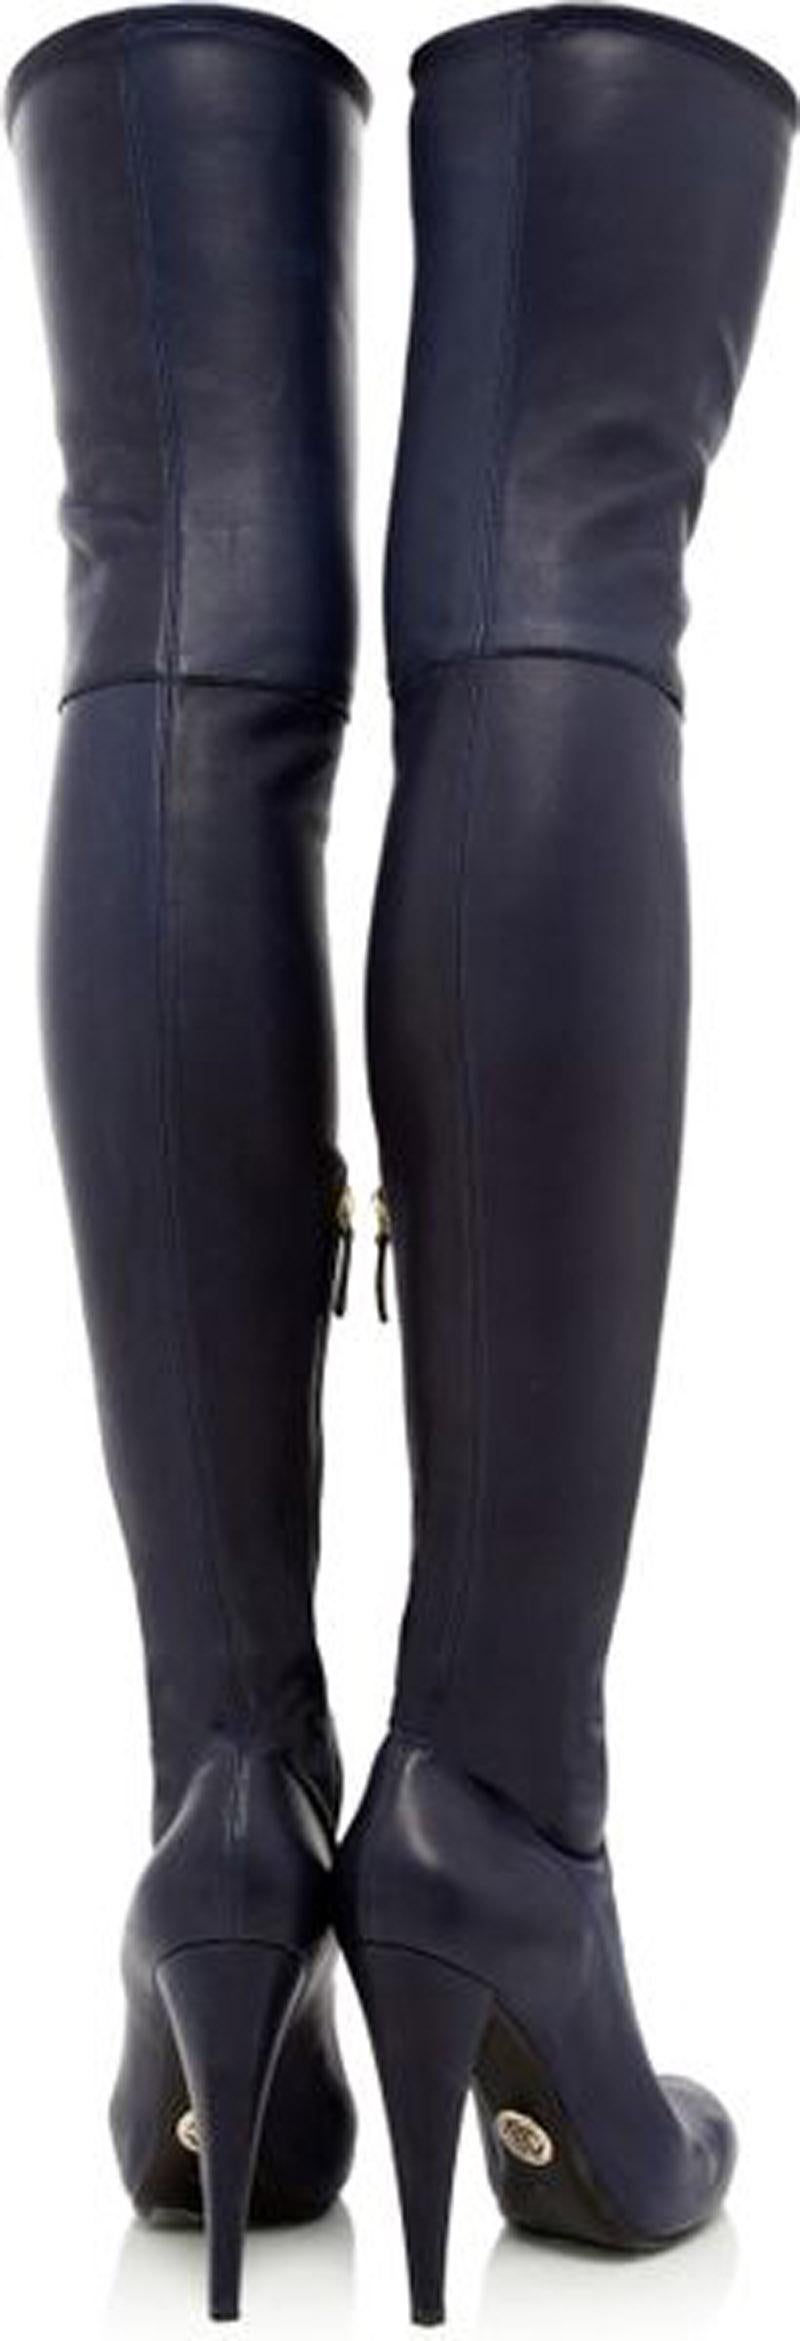 Black New Roberto Cavalli Blue Stretch Soft Leather Thigh High Heel Boots It.41  US 11 For Sale